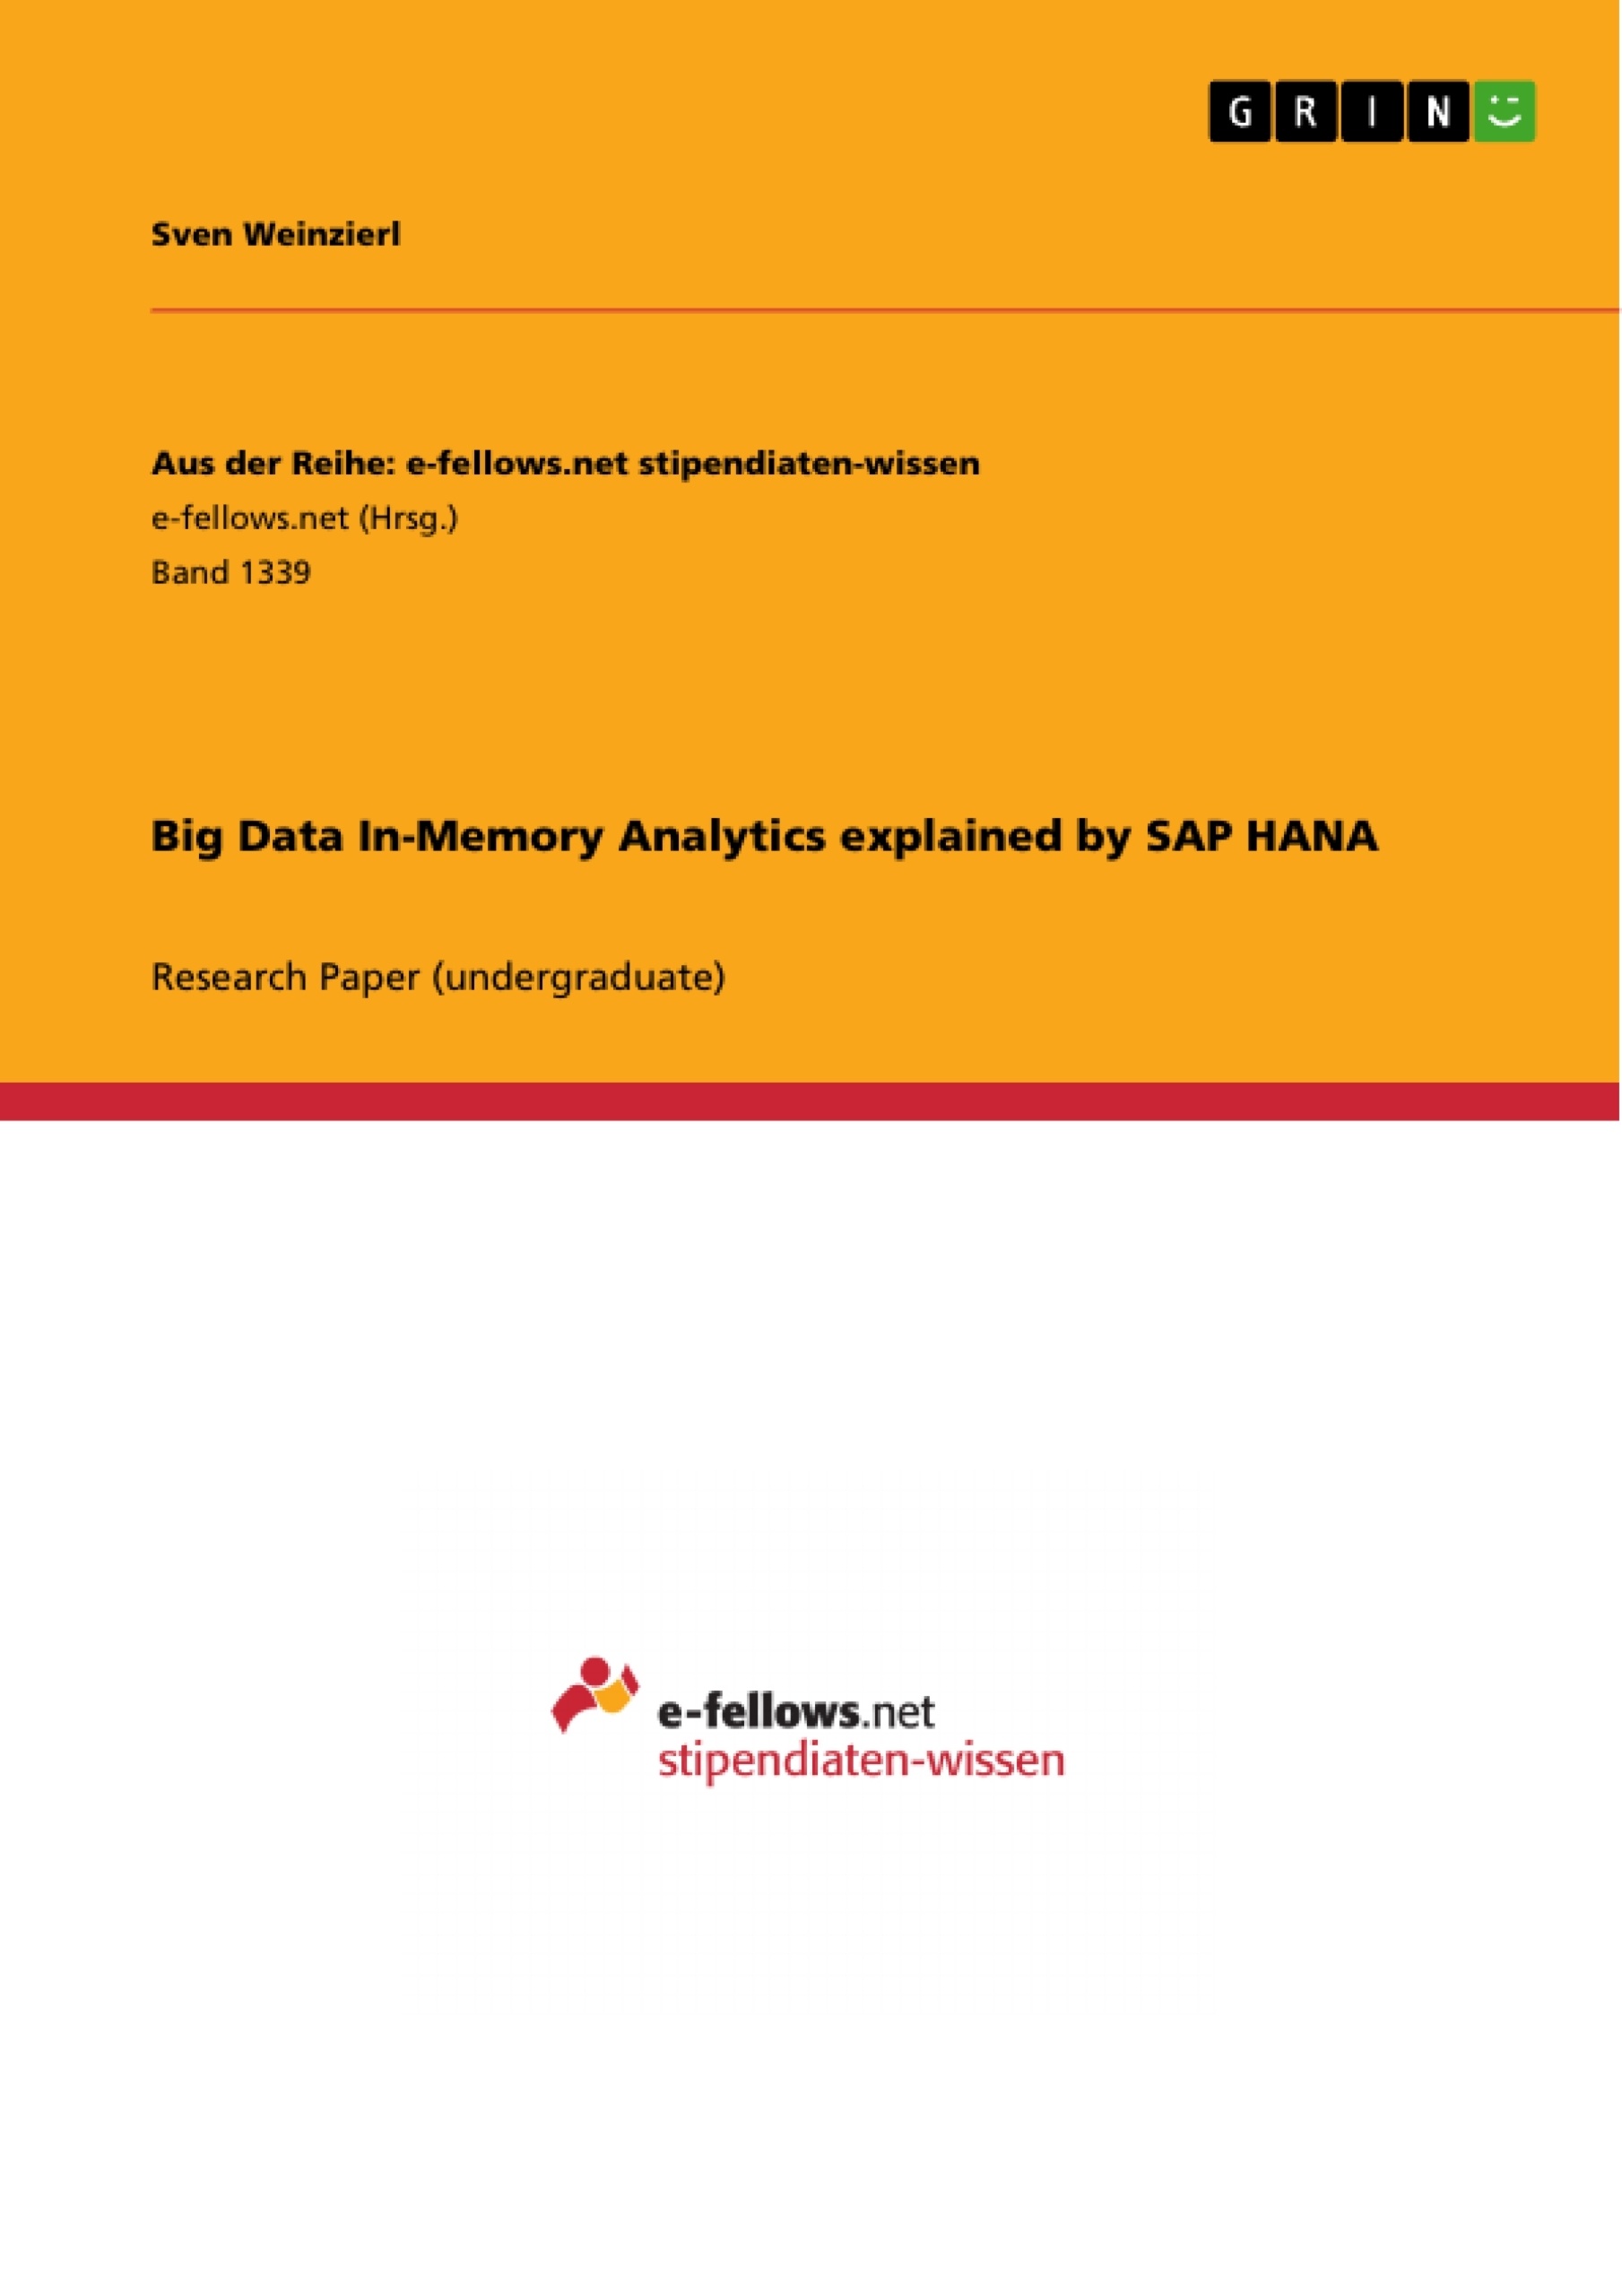 Título: Big Data In-Memory Analytics explained by SAP HANA